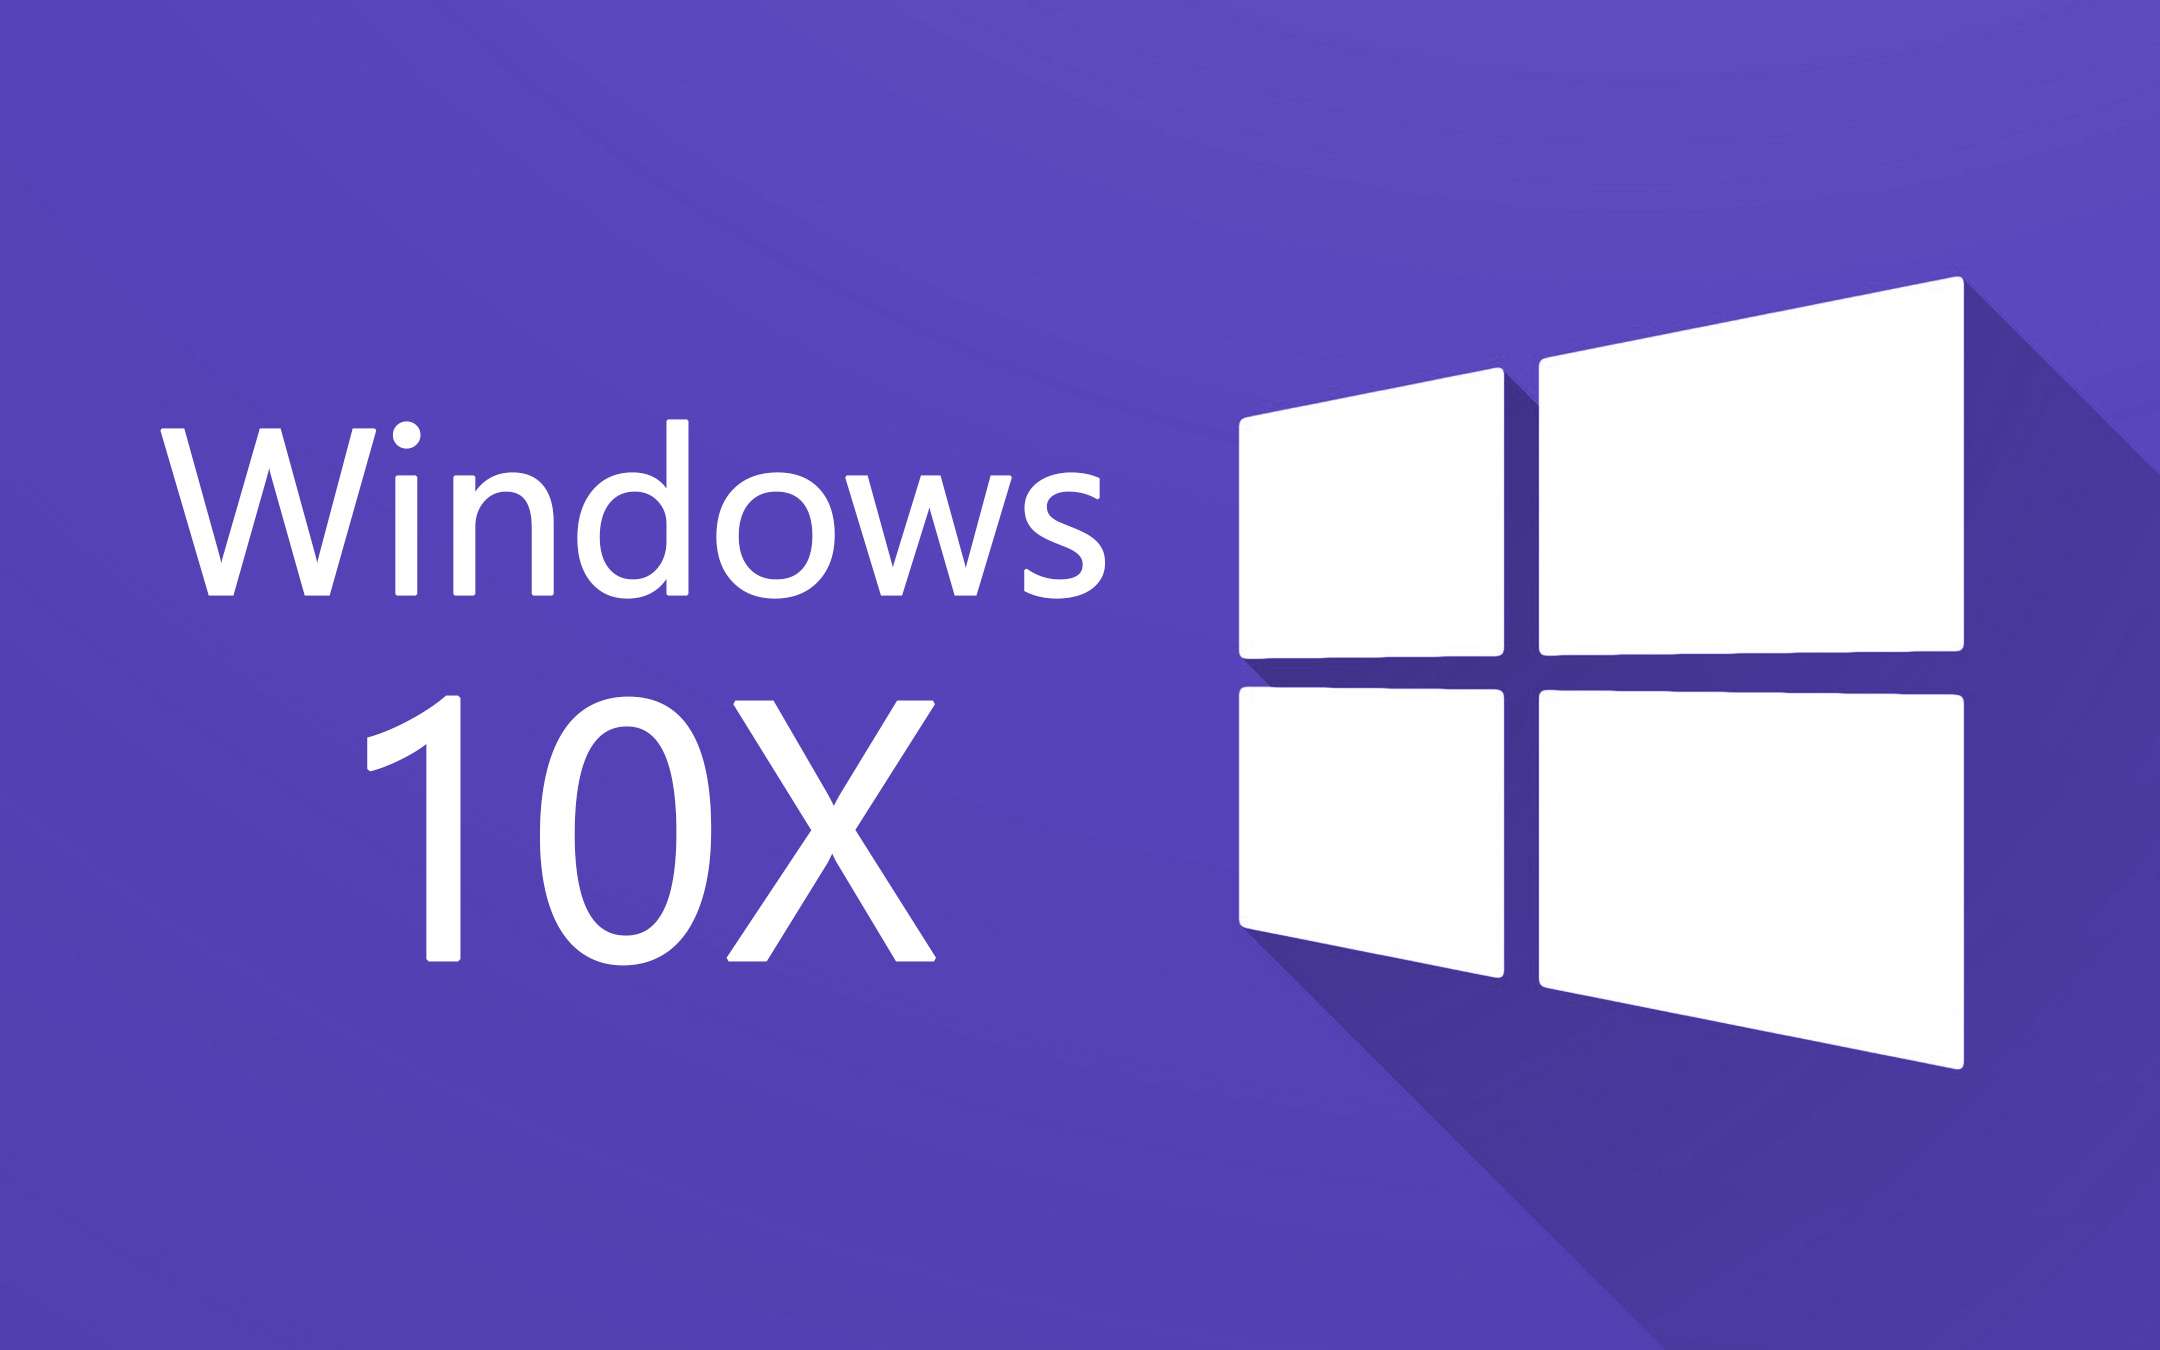 Windows 10X with Modern Standby: Always Connected